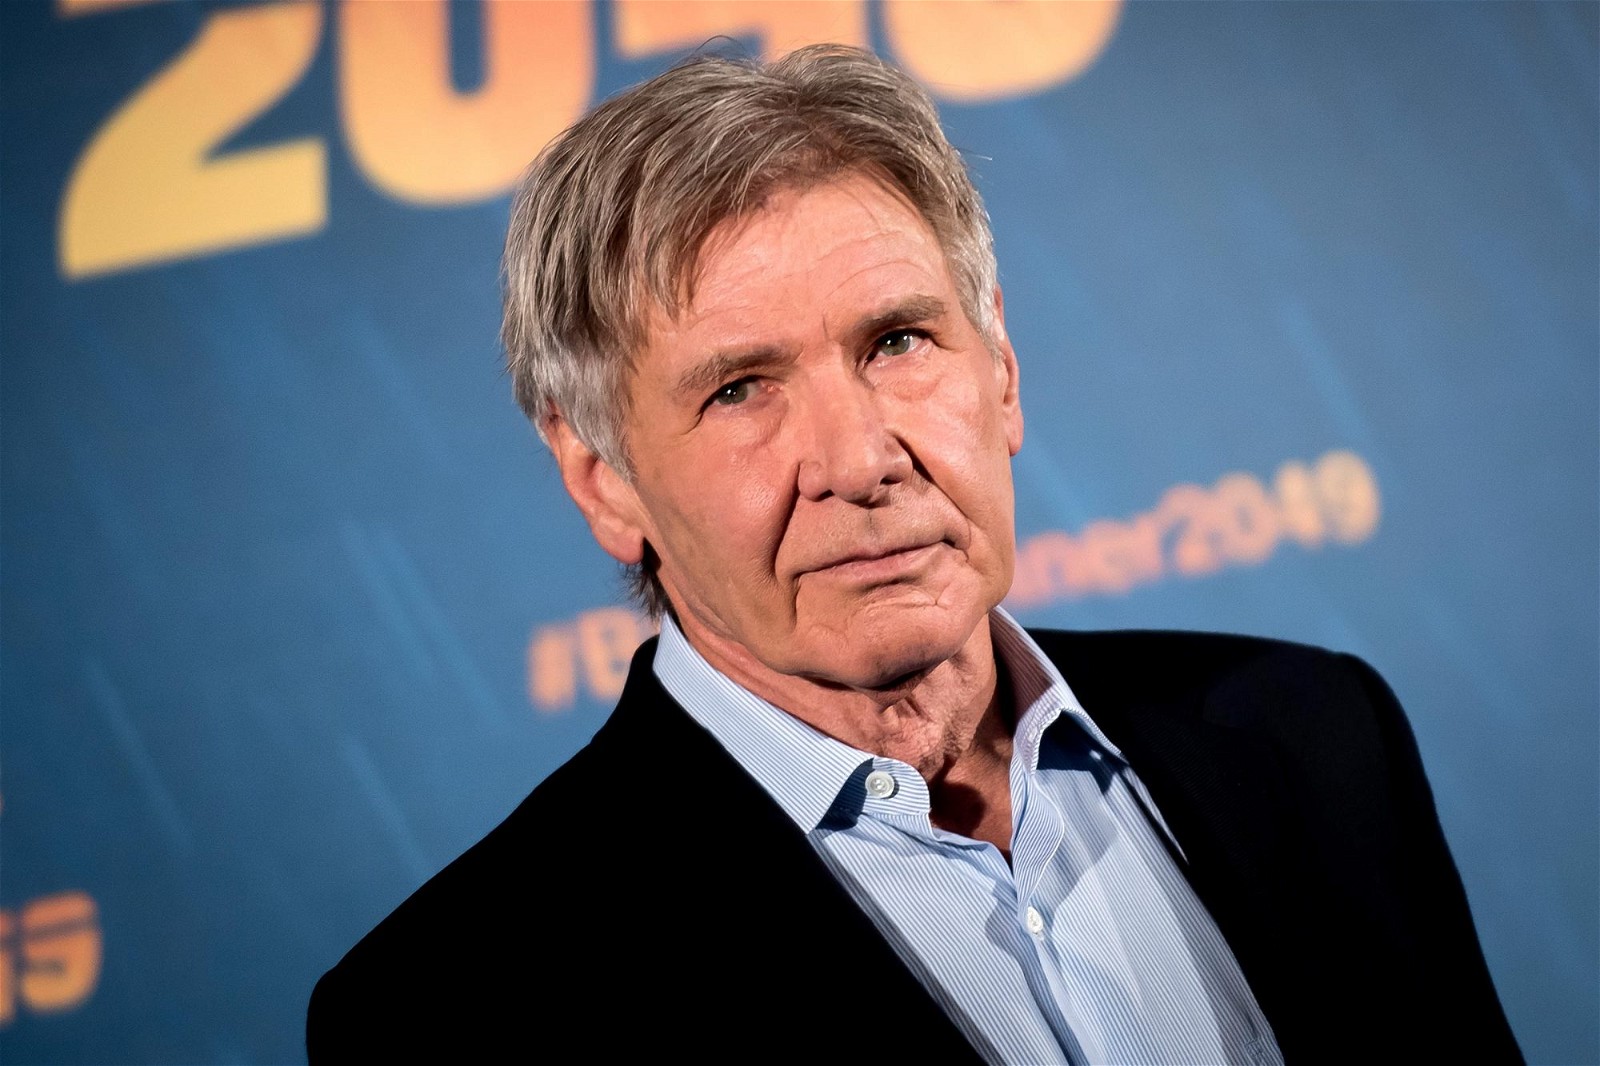 Harrison Ford is known for iconic roles such as Han Solo and Indiana Jones.